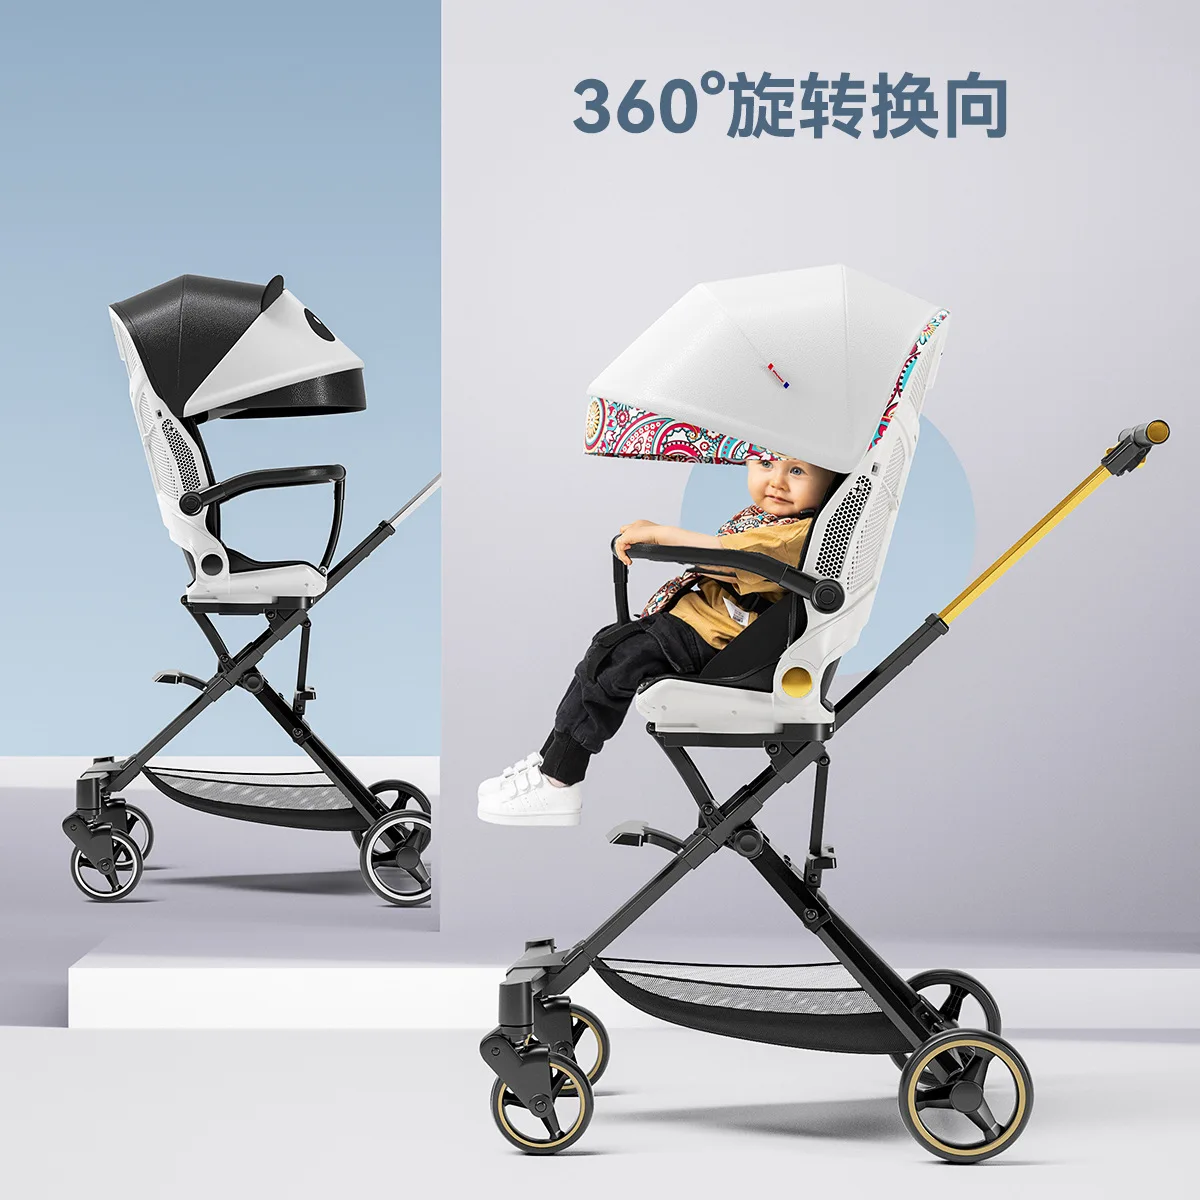 Playkids Can Walk The Baby Stroller, Can Seat, Recline, High Landscape Stroller, Light Foldable Stroller Baby Car Seat Cover enlarge